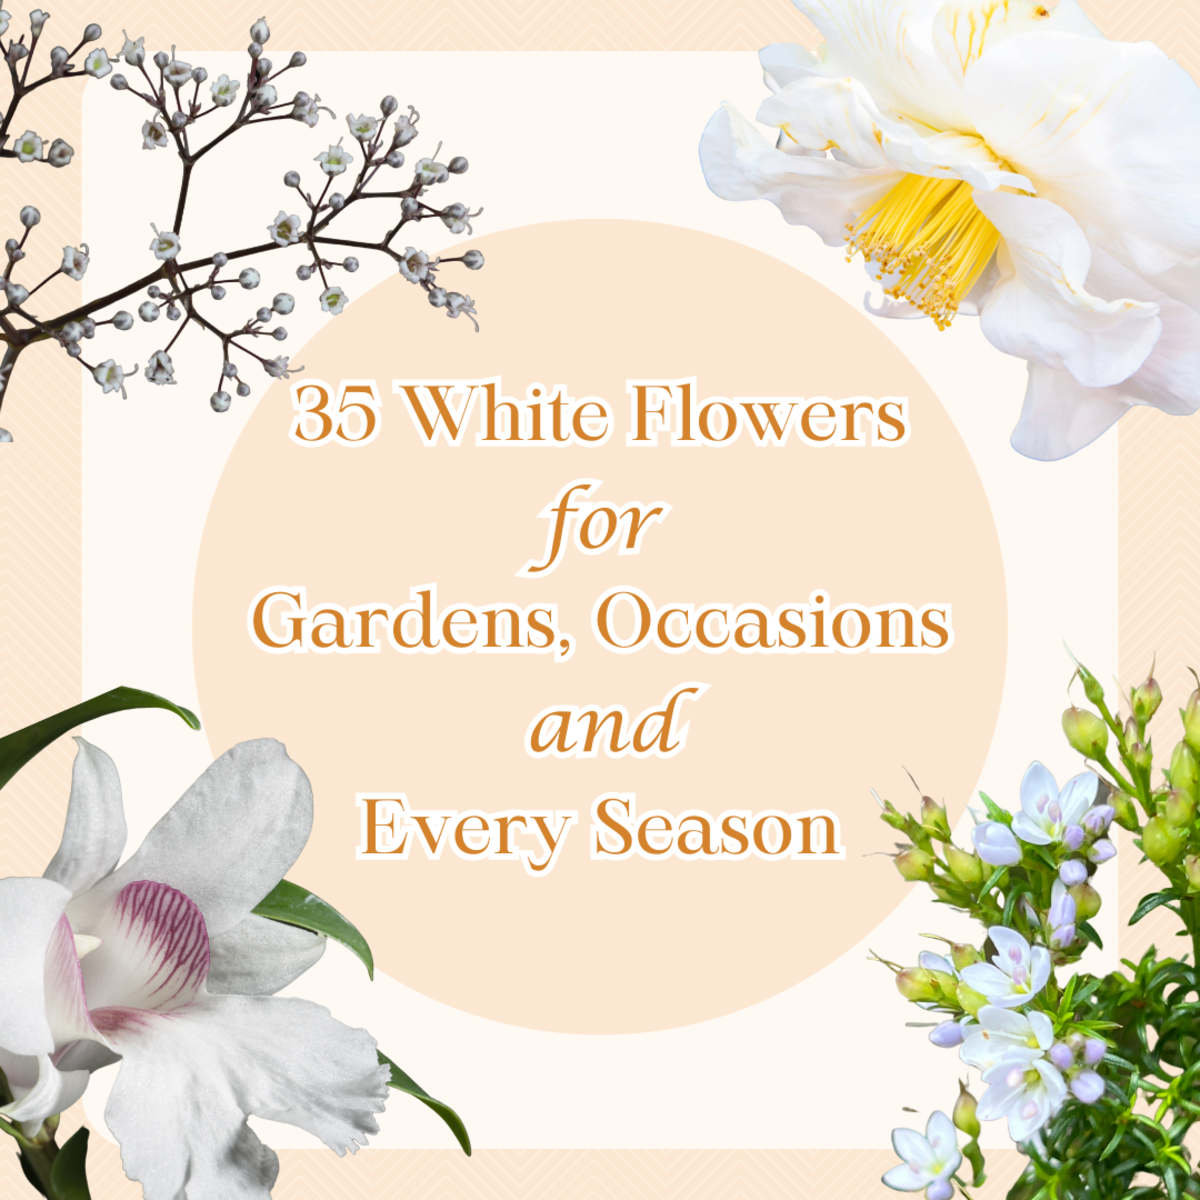 115 Types of White Flowers: Names of Tiny Flowers, White Flowers By Season